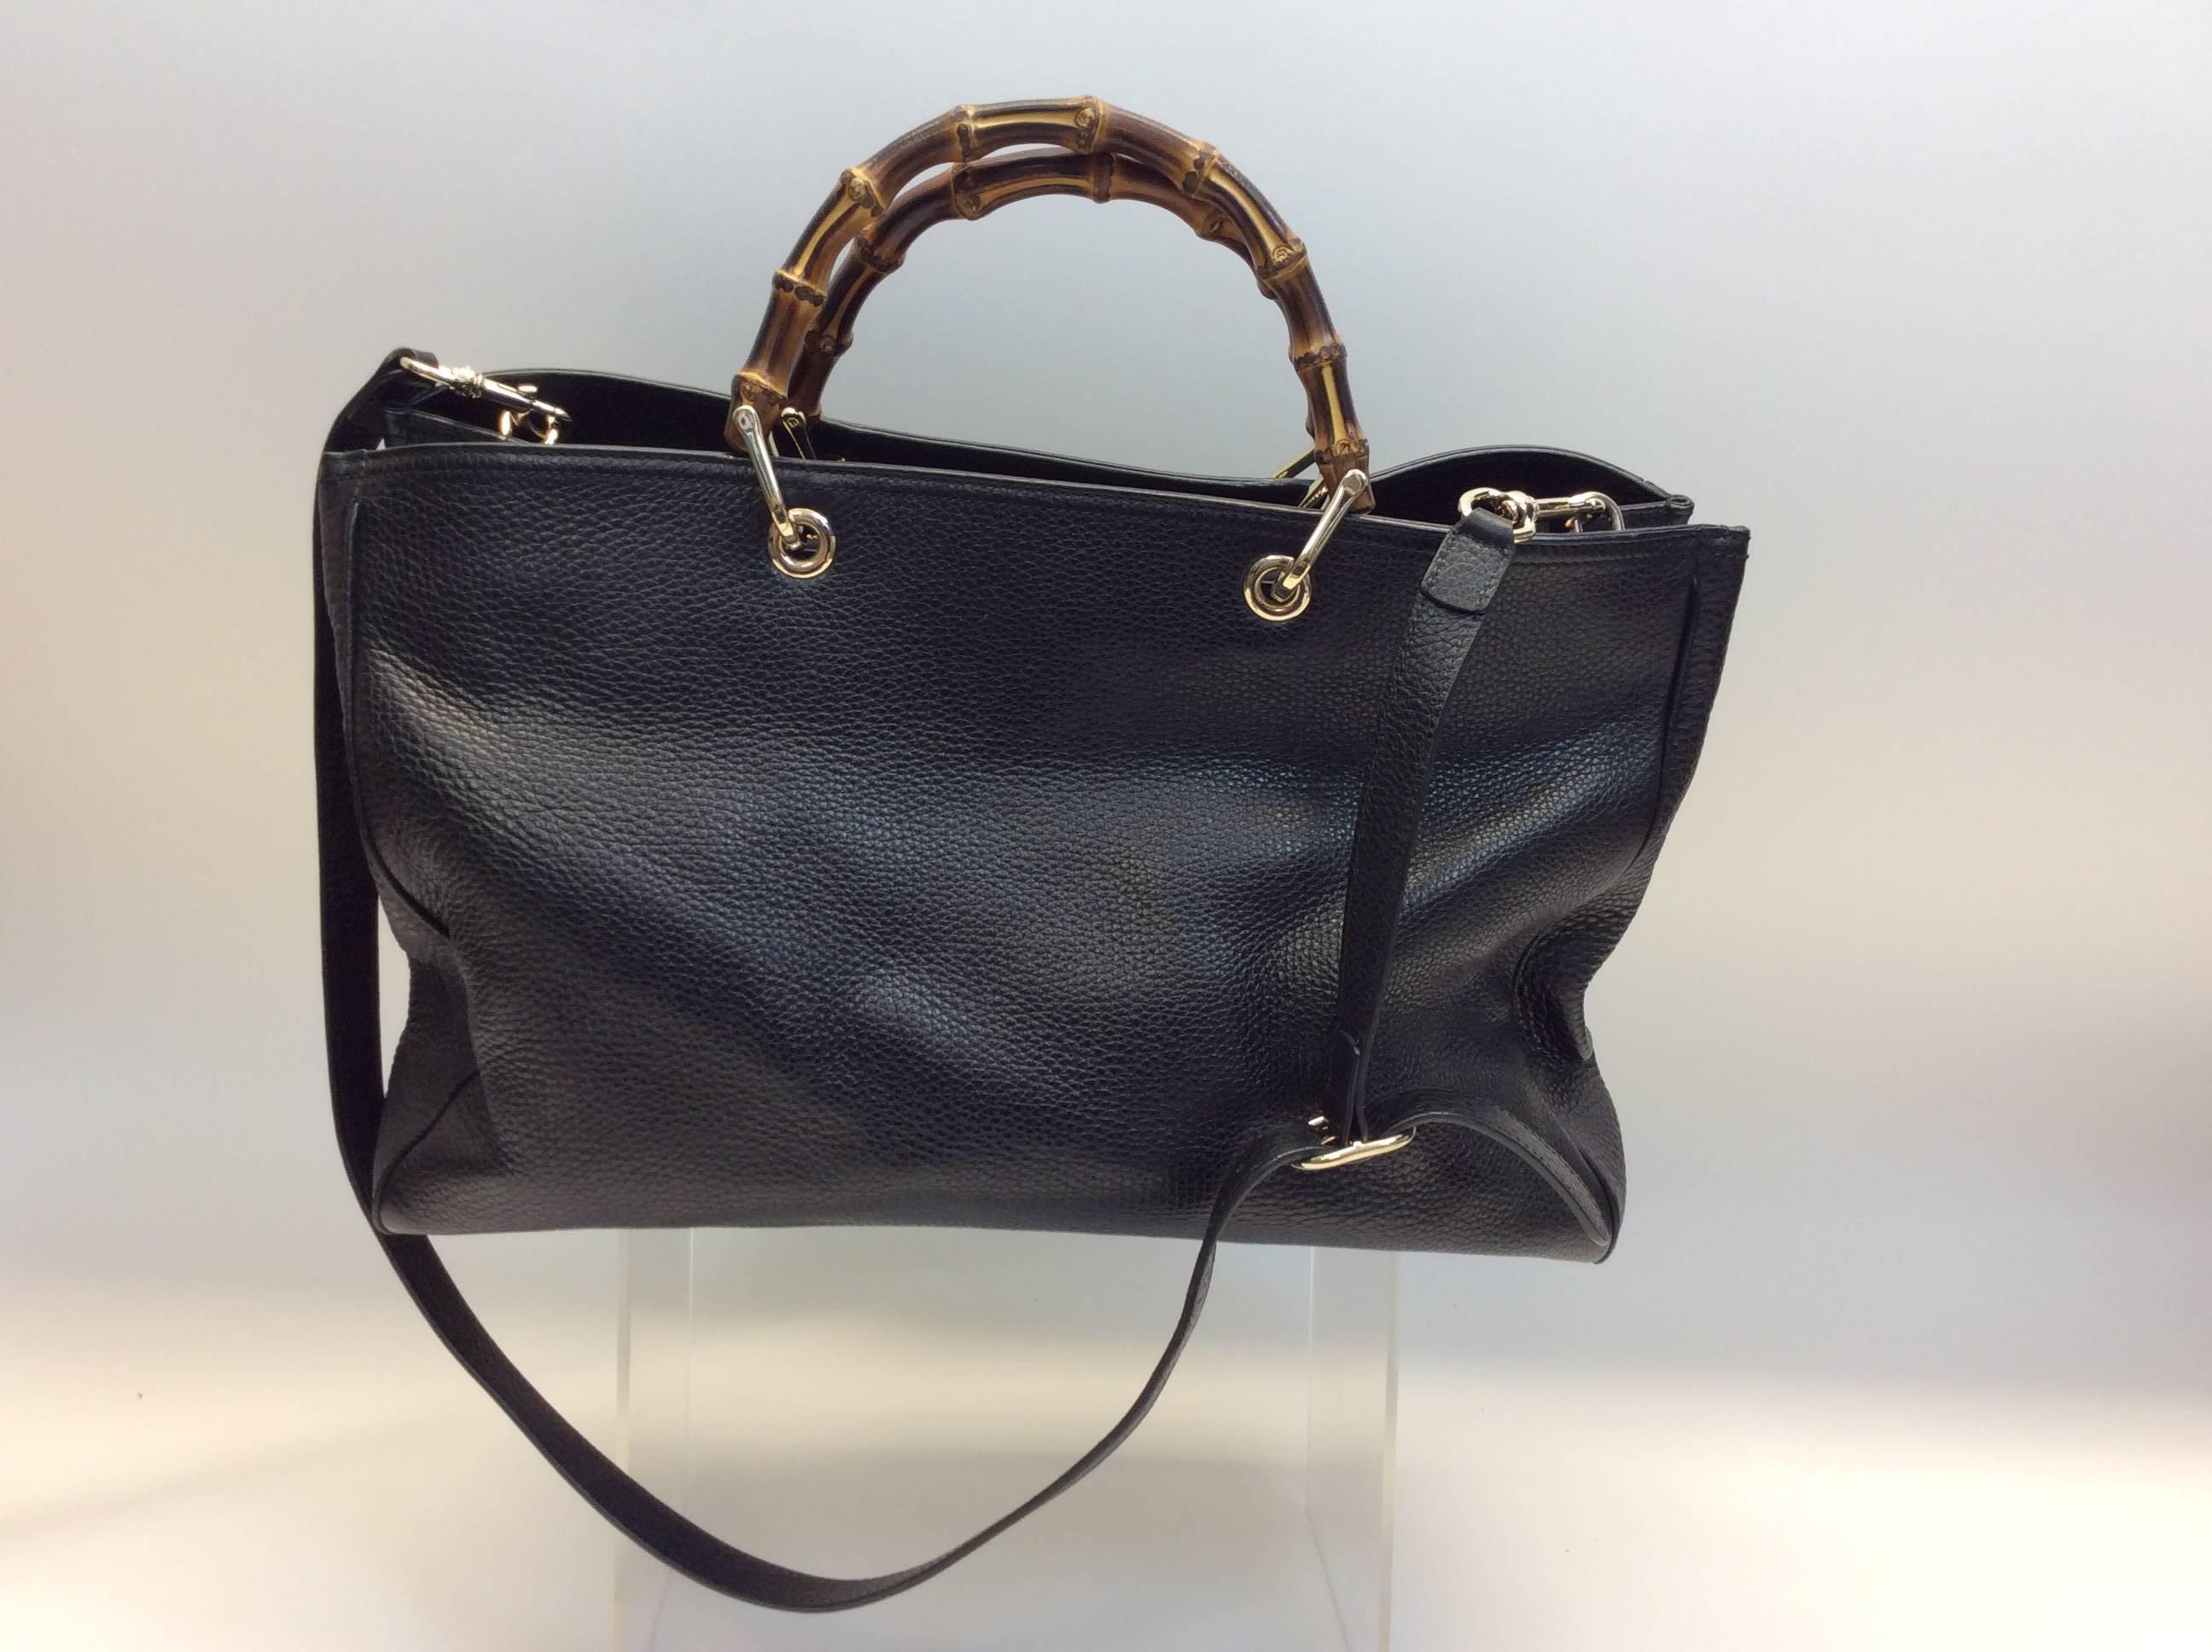 Gucci Black Leather Bamboo Tote In Excellent Condition For Sale In Narberth, PA